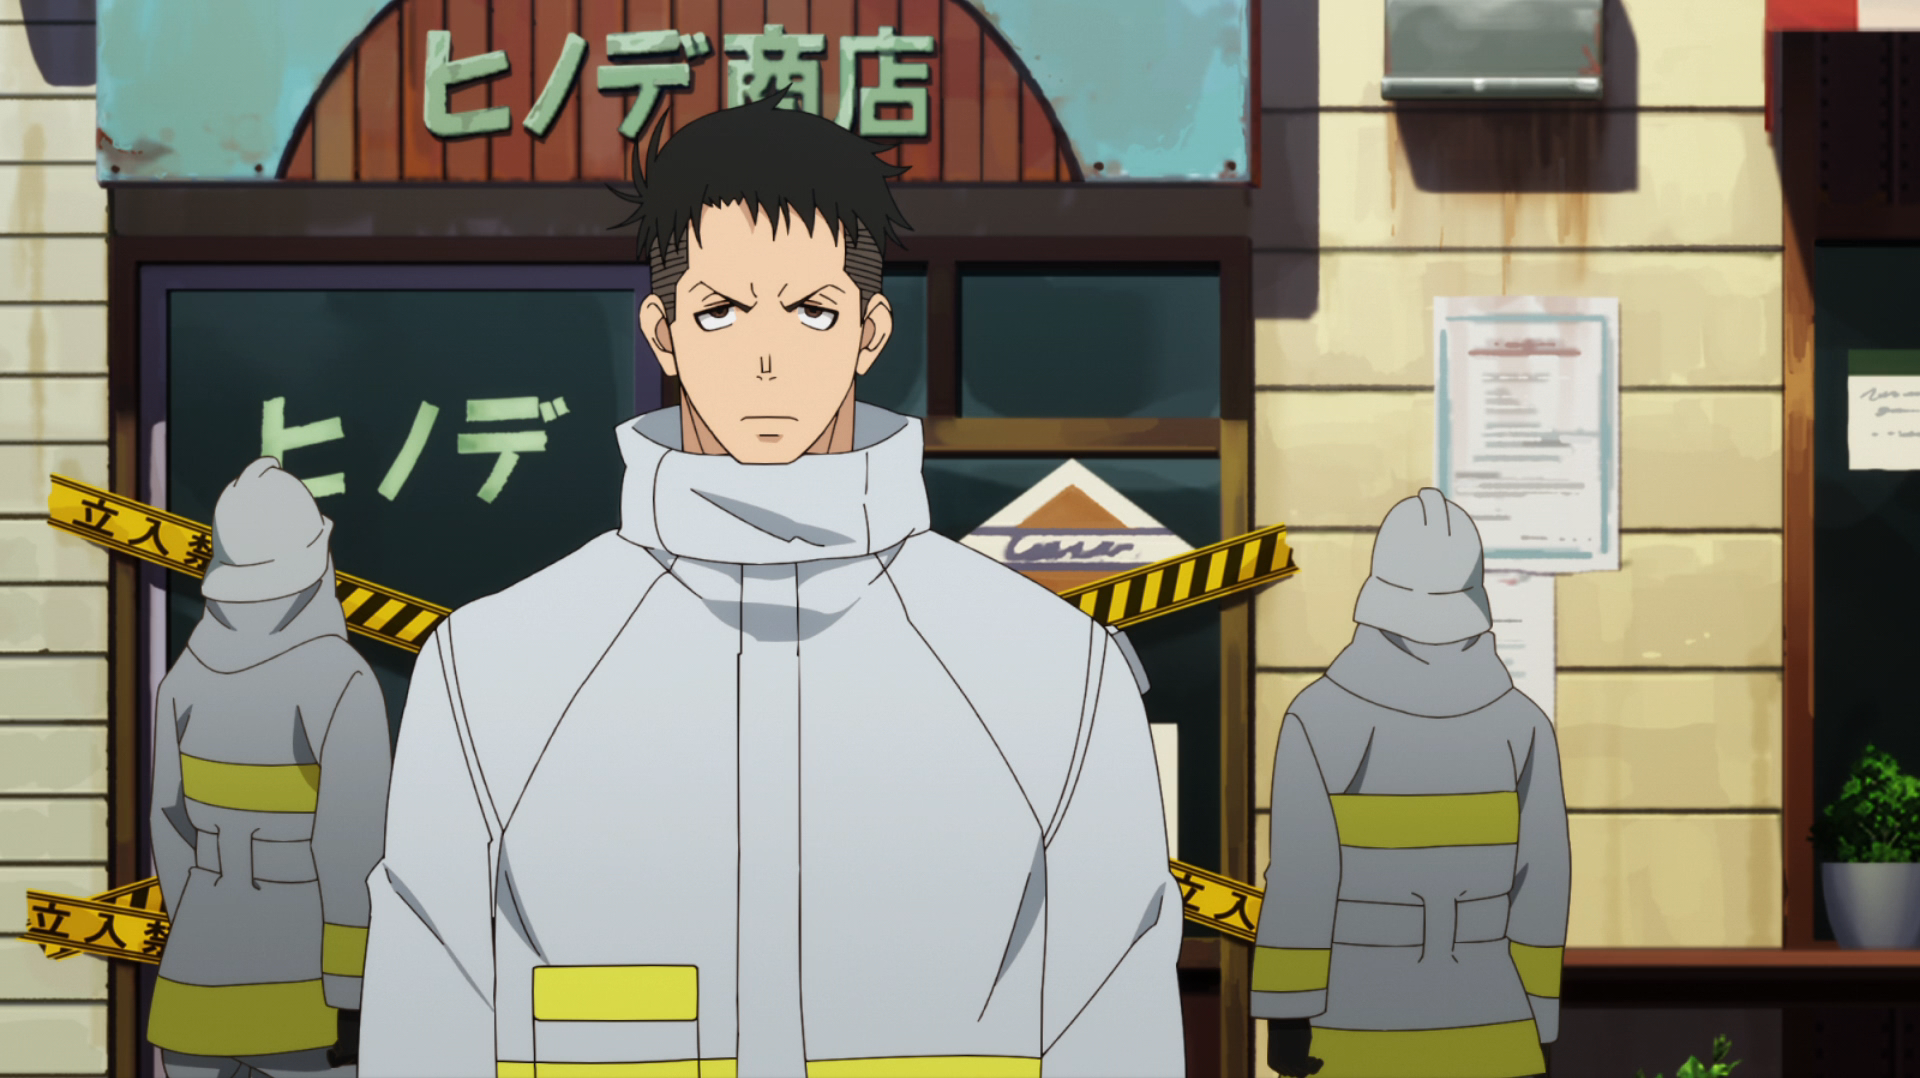 Fire Force Episode 8  Infernal Insects  The Otaku Author  Anime fight  Funny scenes Episode